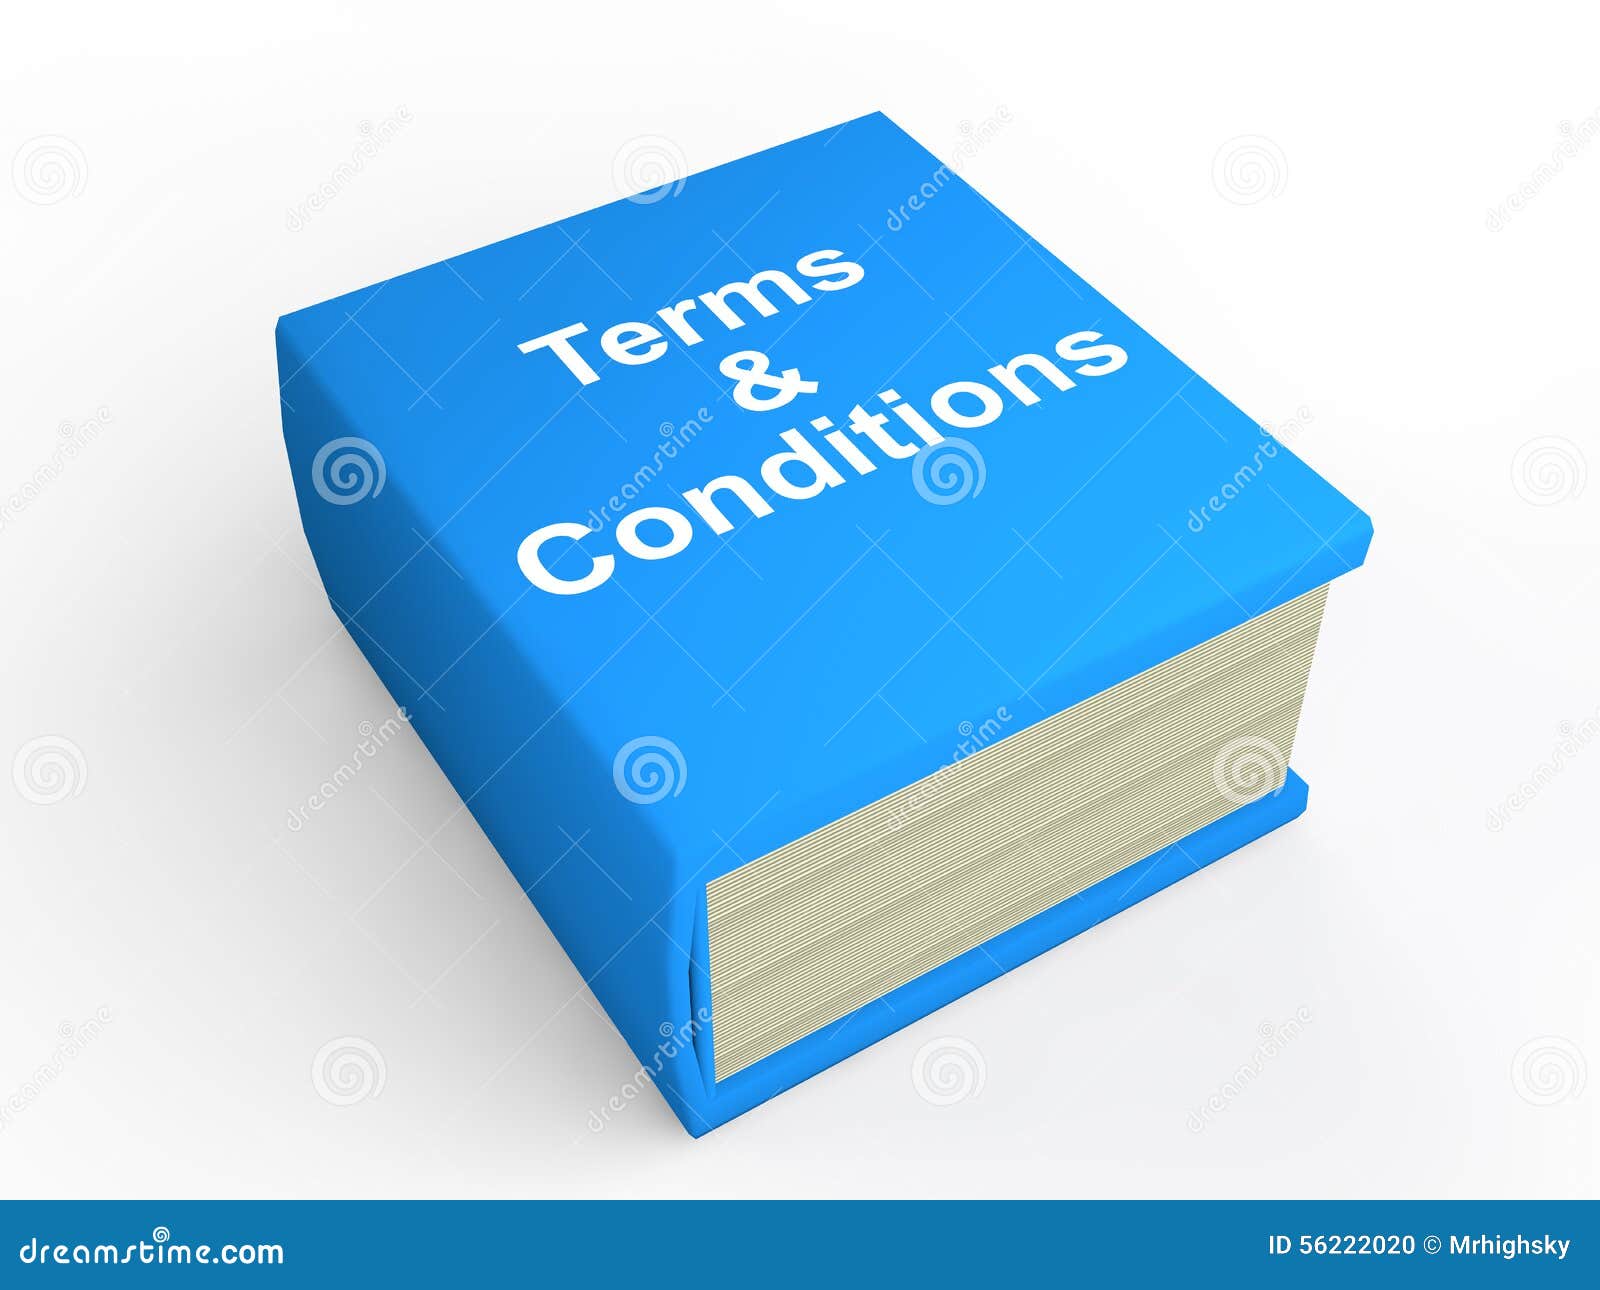 microsoft clipart terms and conditions - photo #14